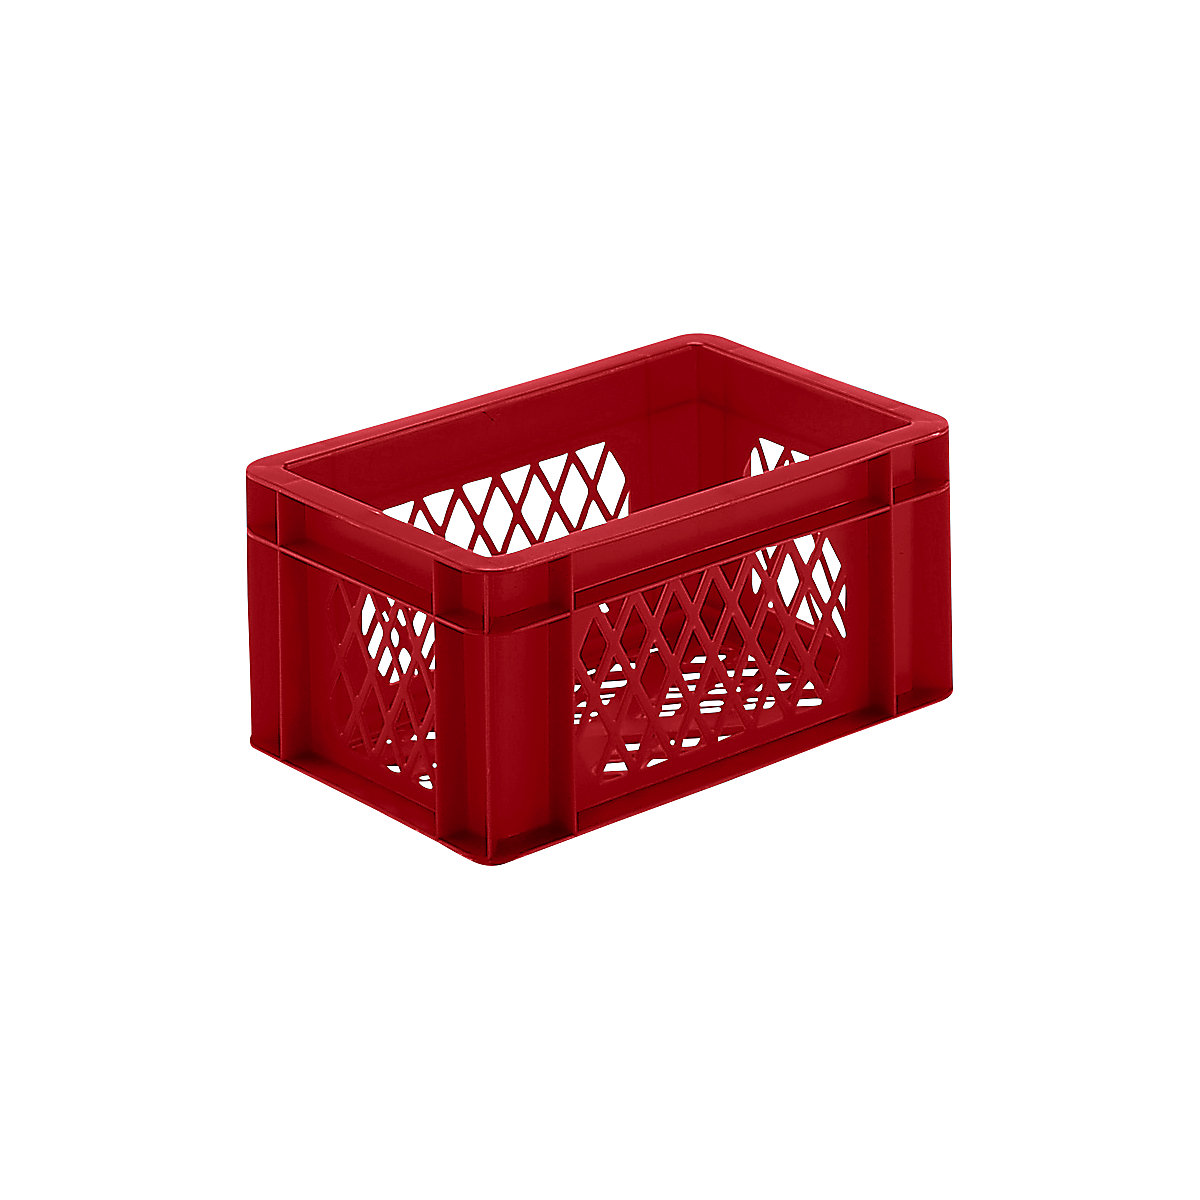 Euro stacking container, perforated walls and base, LxWxH 300 x 200 x 145 mm, red, pack of 5-7